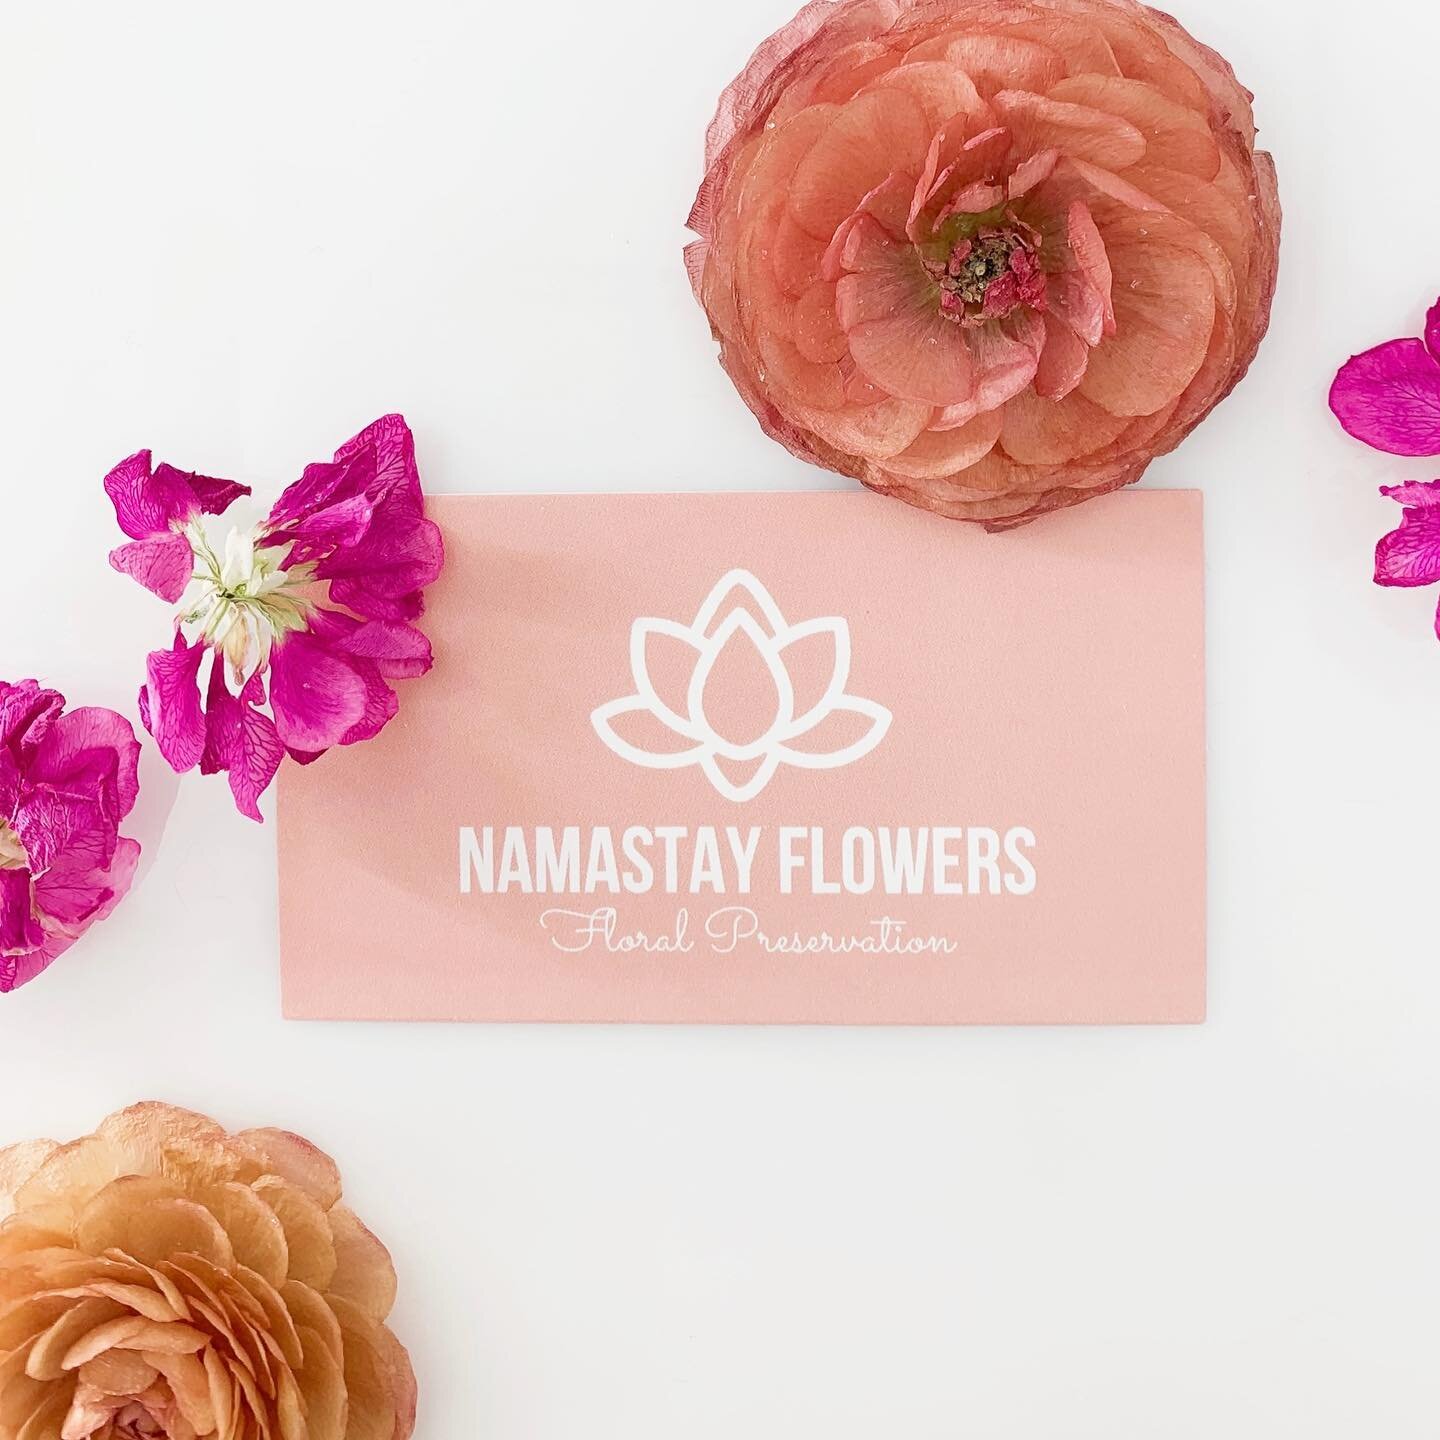 Modern flower preservation is a fairly new style to the wedding industry, but its here to stay. Couples may not have had this option when they celebrated their wedding previously, but we&rsquo;ve got you covered there too. 
&bull;
&bull;At Namastay F